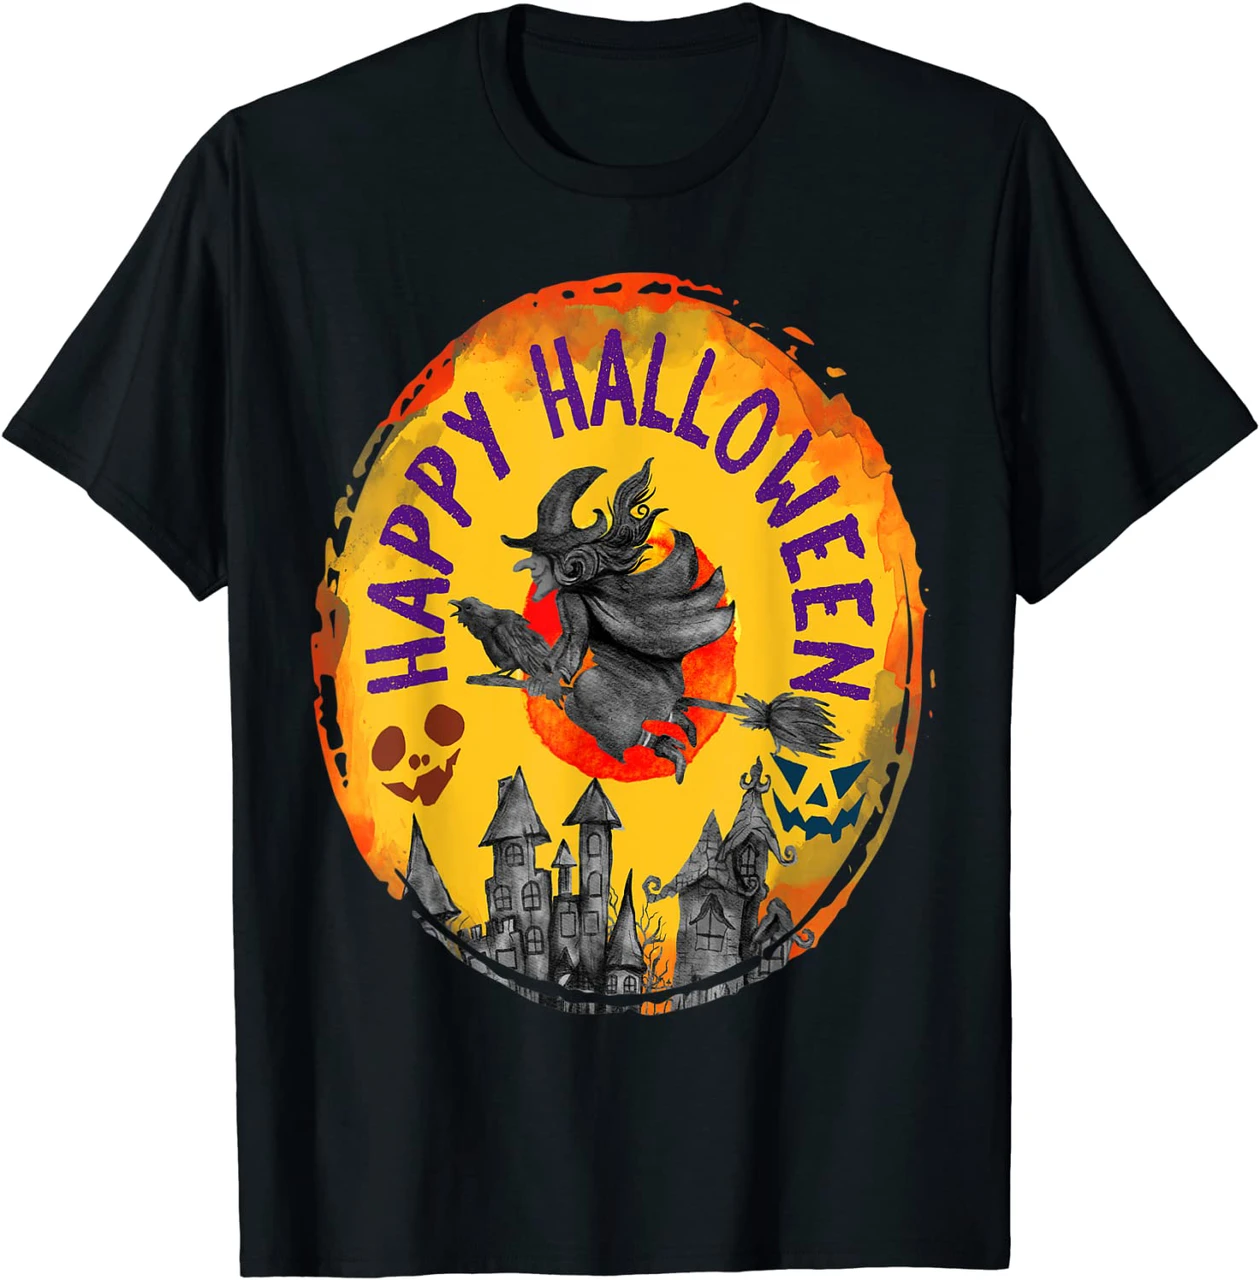 Spooky Graphics About Happy Halloween Shirt